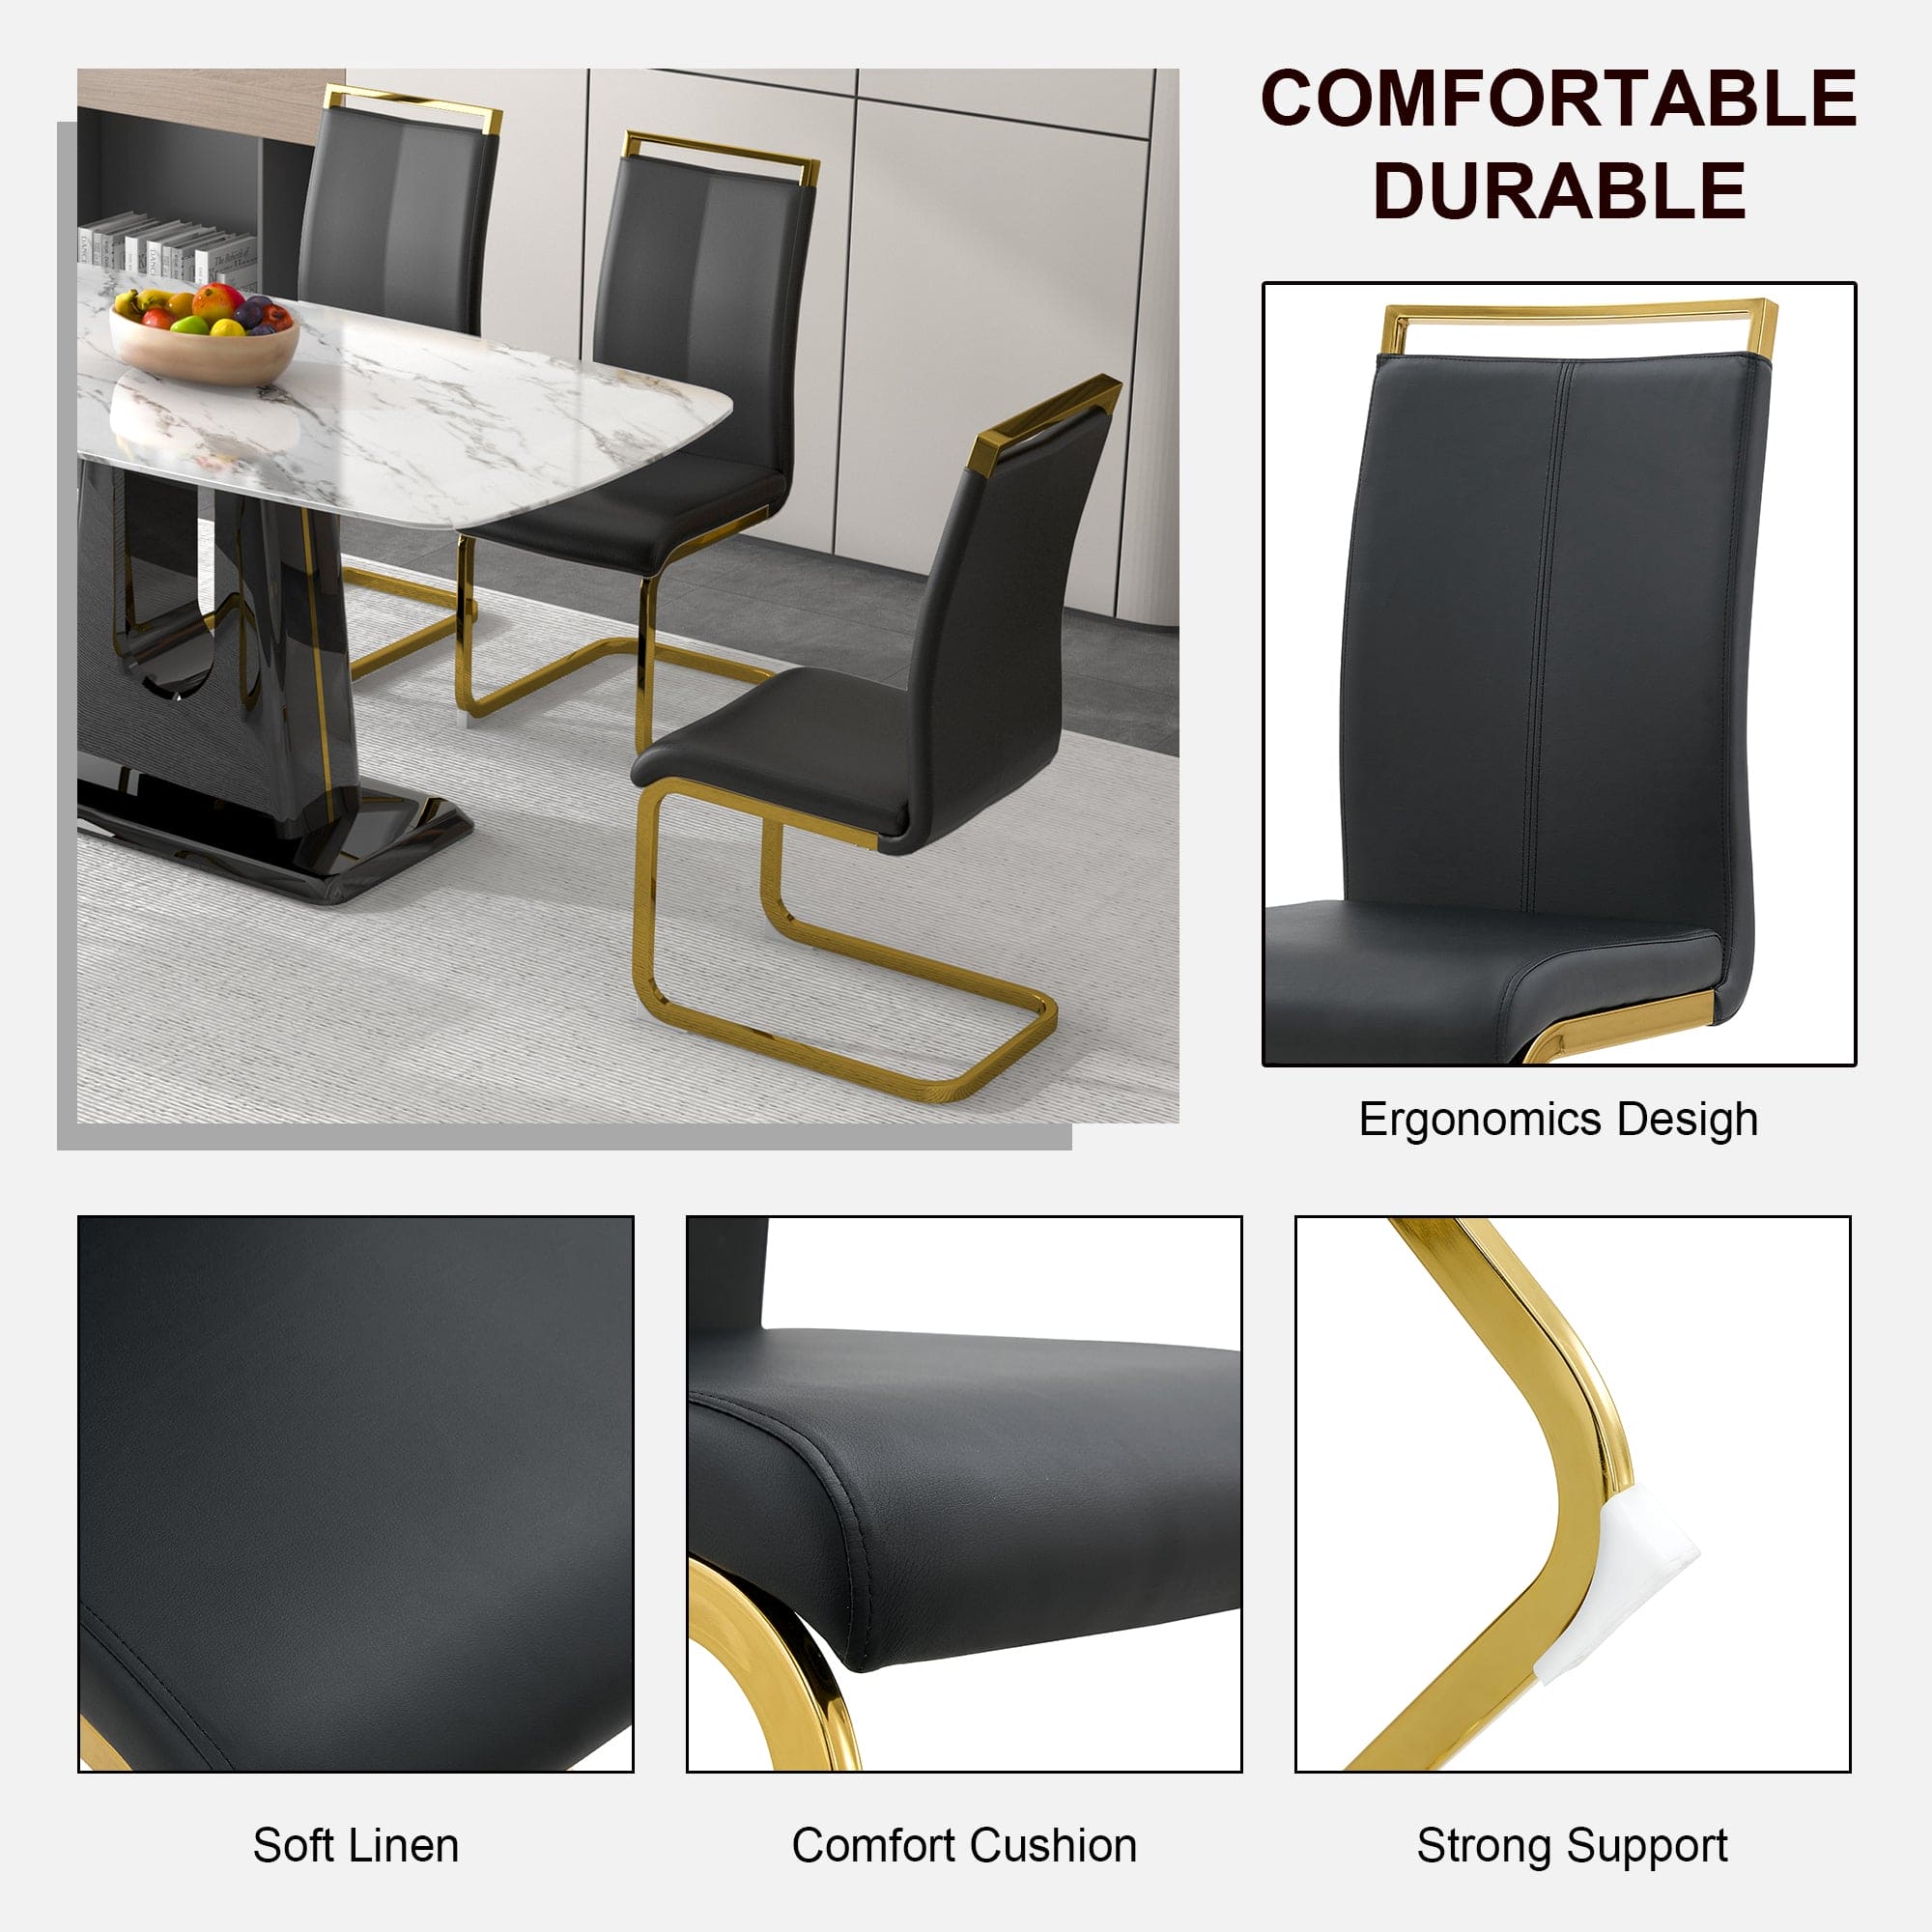 1 table and 6 chairs. Modern, simple and luxurious black imitation marble rectangular dining table and desk with 6 black PU gold plated leg chairs 63'' x 35.4'' X 30''